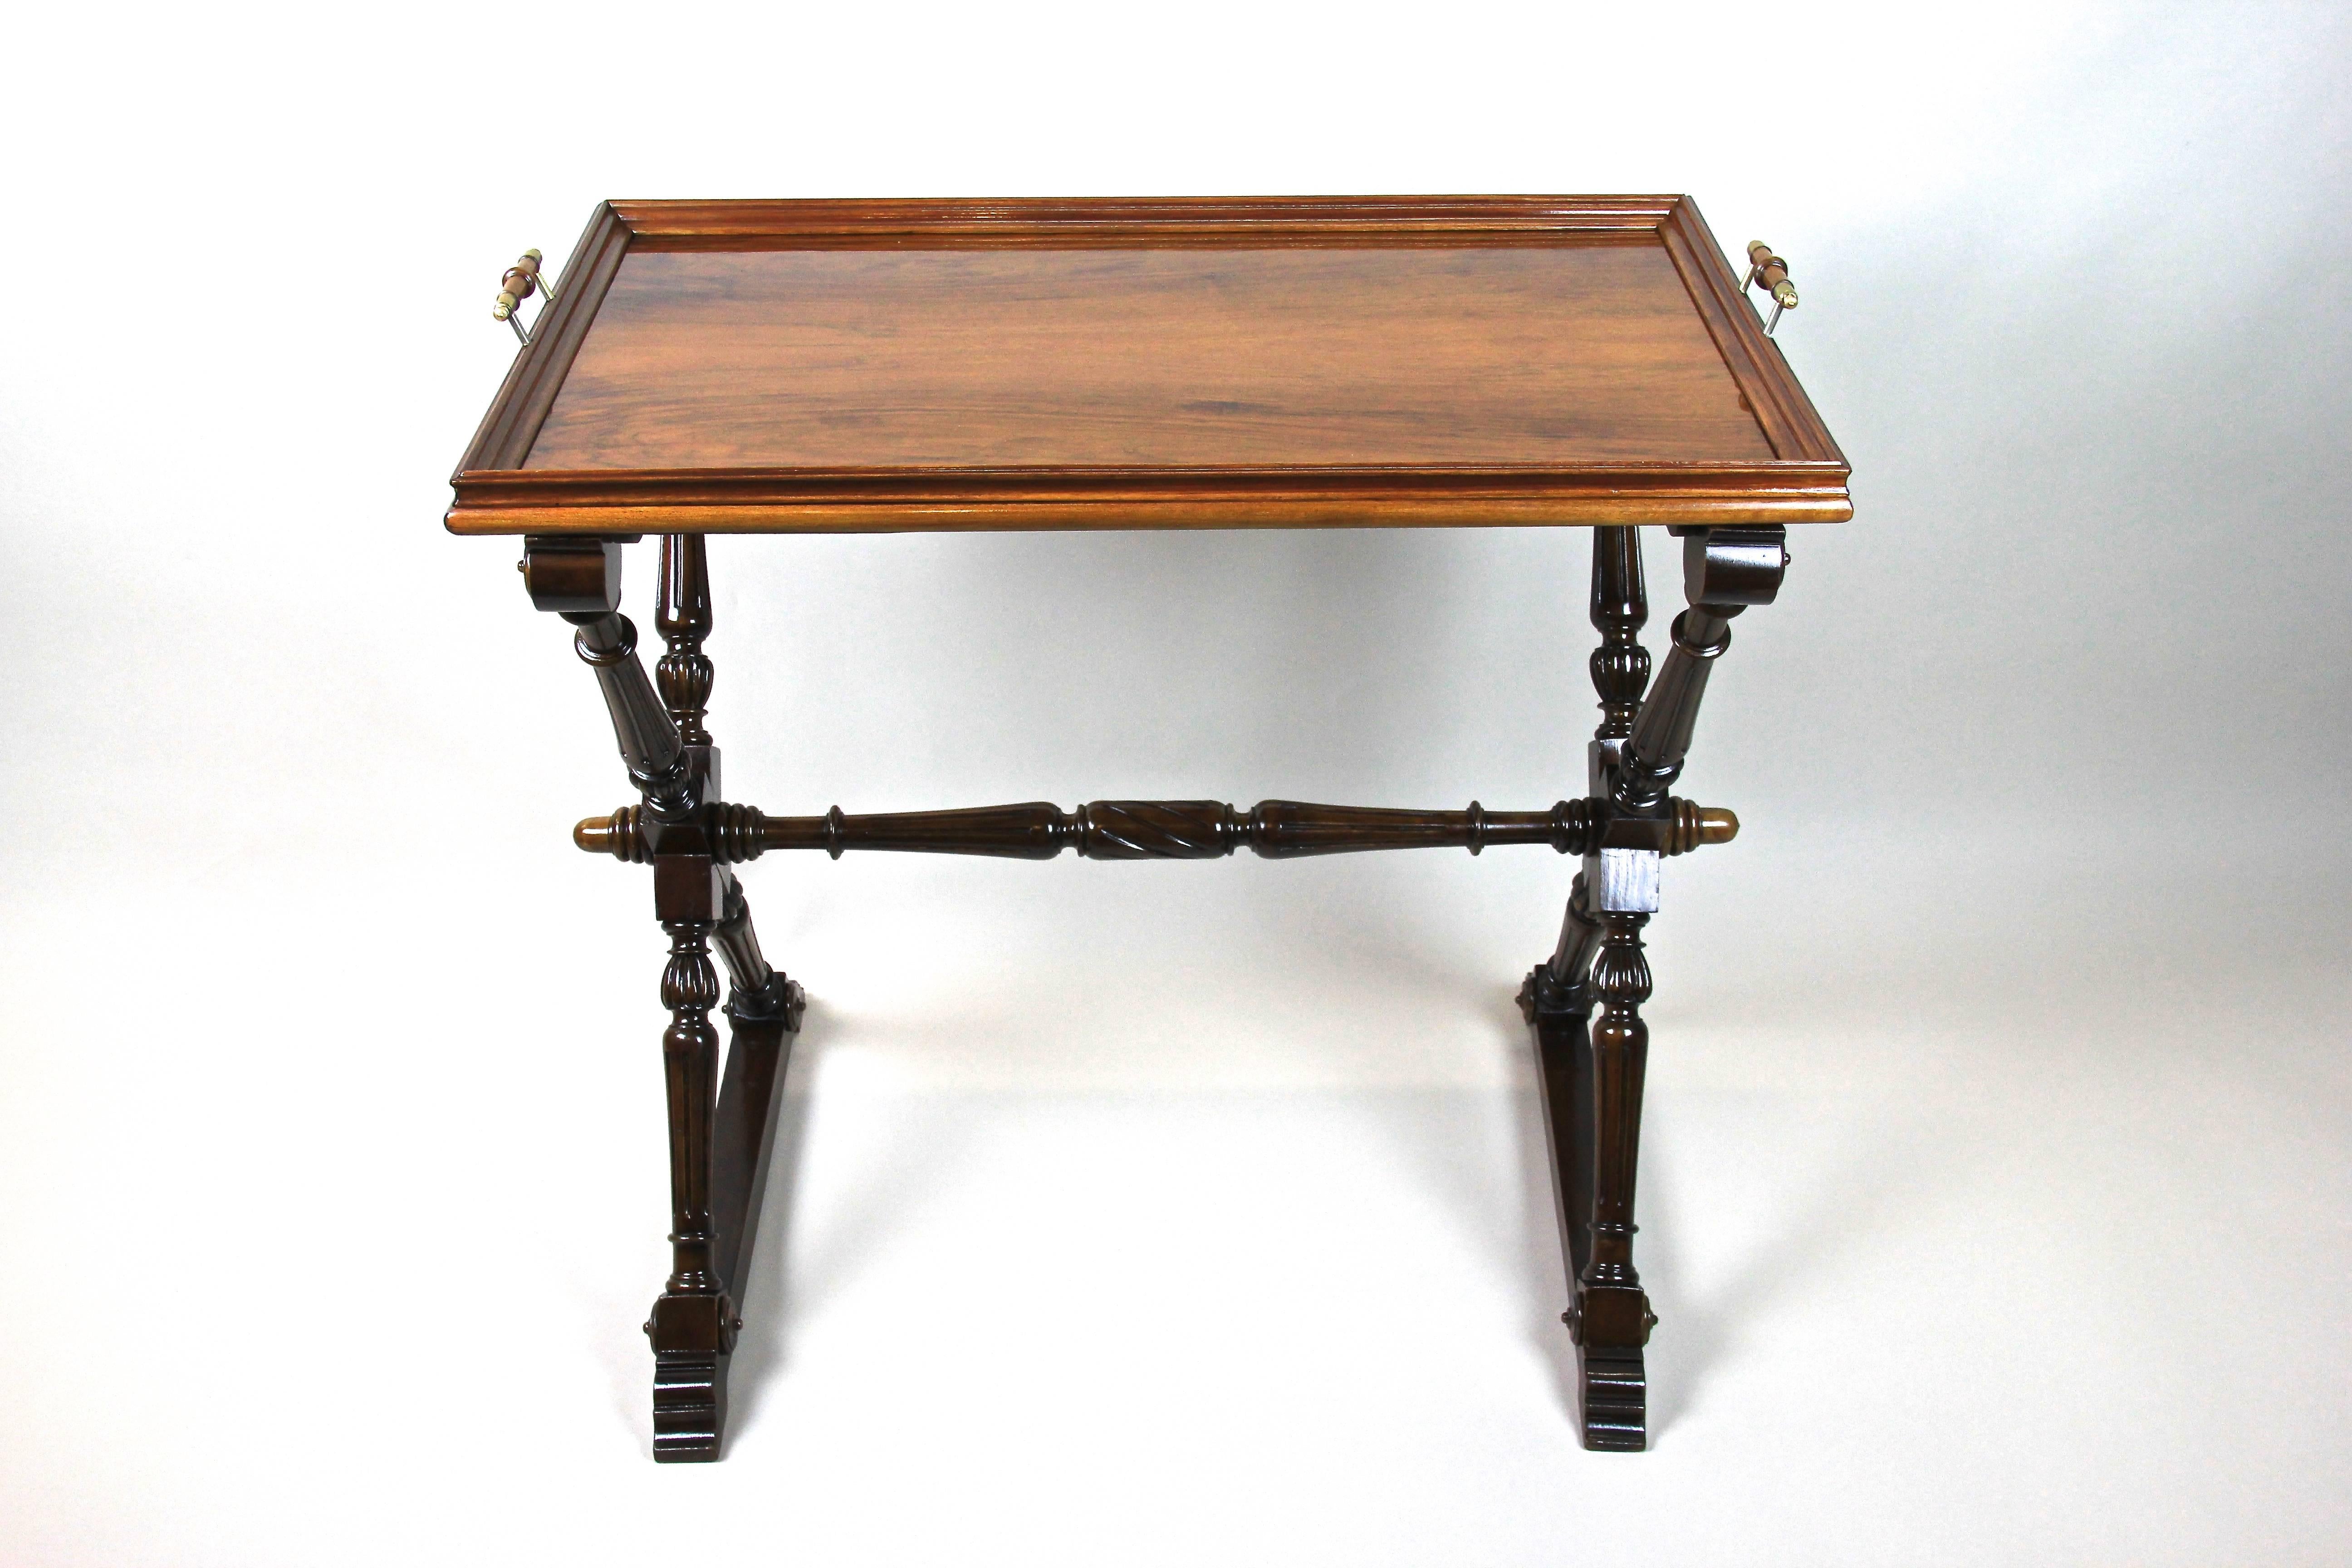 Beautiful Baroque Revival table with removable tray from Austria, late 19th century, circa 1870. Made of solid walnut this artfully hand carved piece shows great designed legs and comes with a nice highlight - a removable tray tabletop veneered in